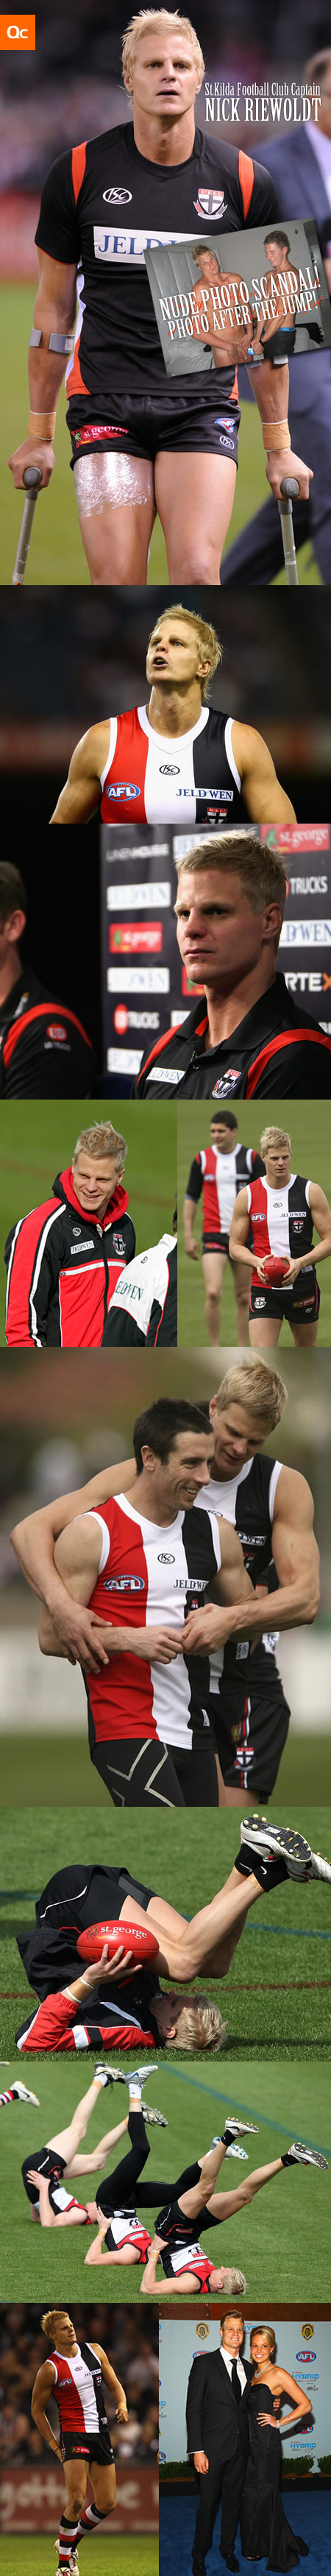 Nick Riewoldt Nude Photo Scandal